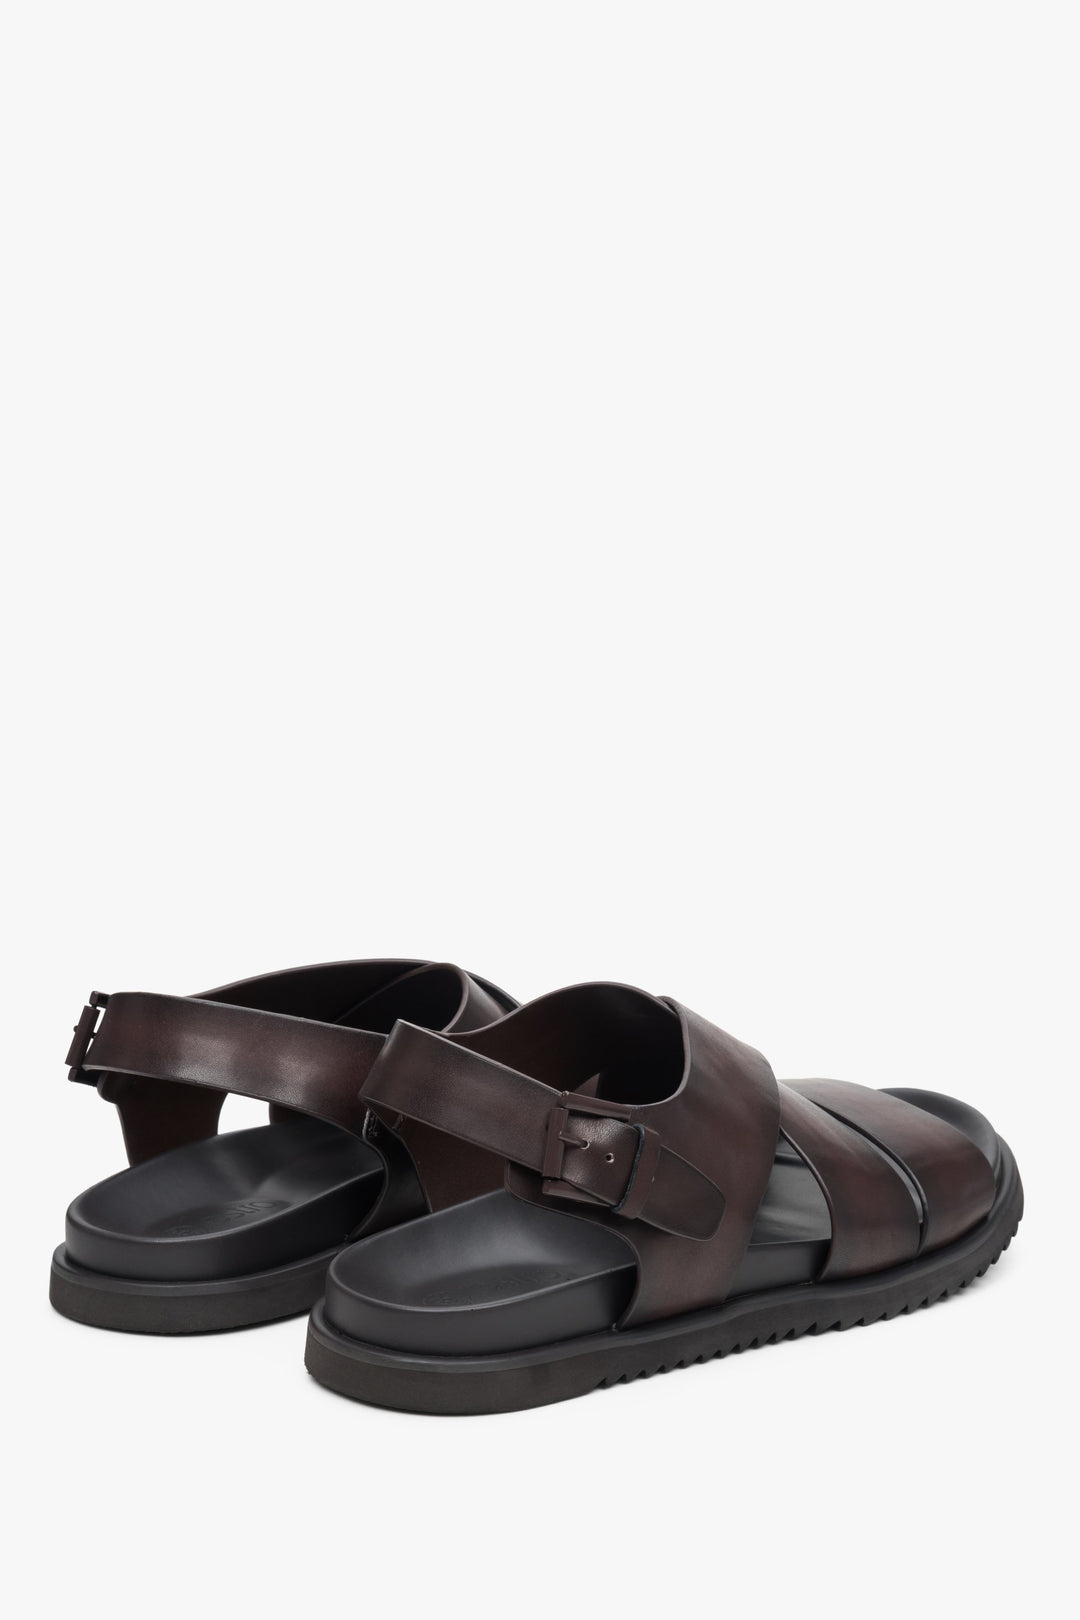 Men's brown  leather sandals by Estro with thick, crossed straps - close-up of the side seam and heel.